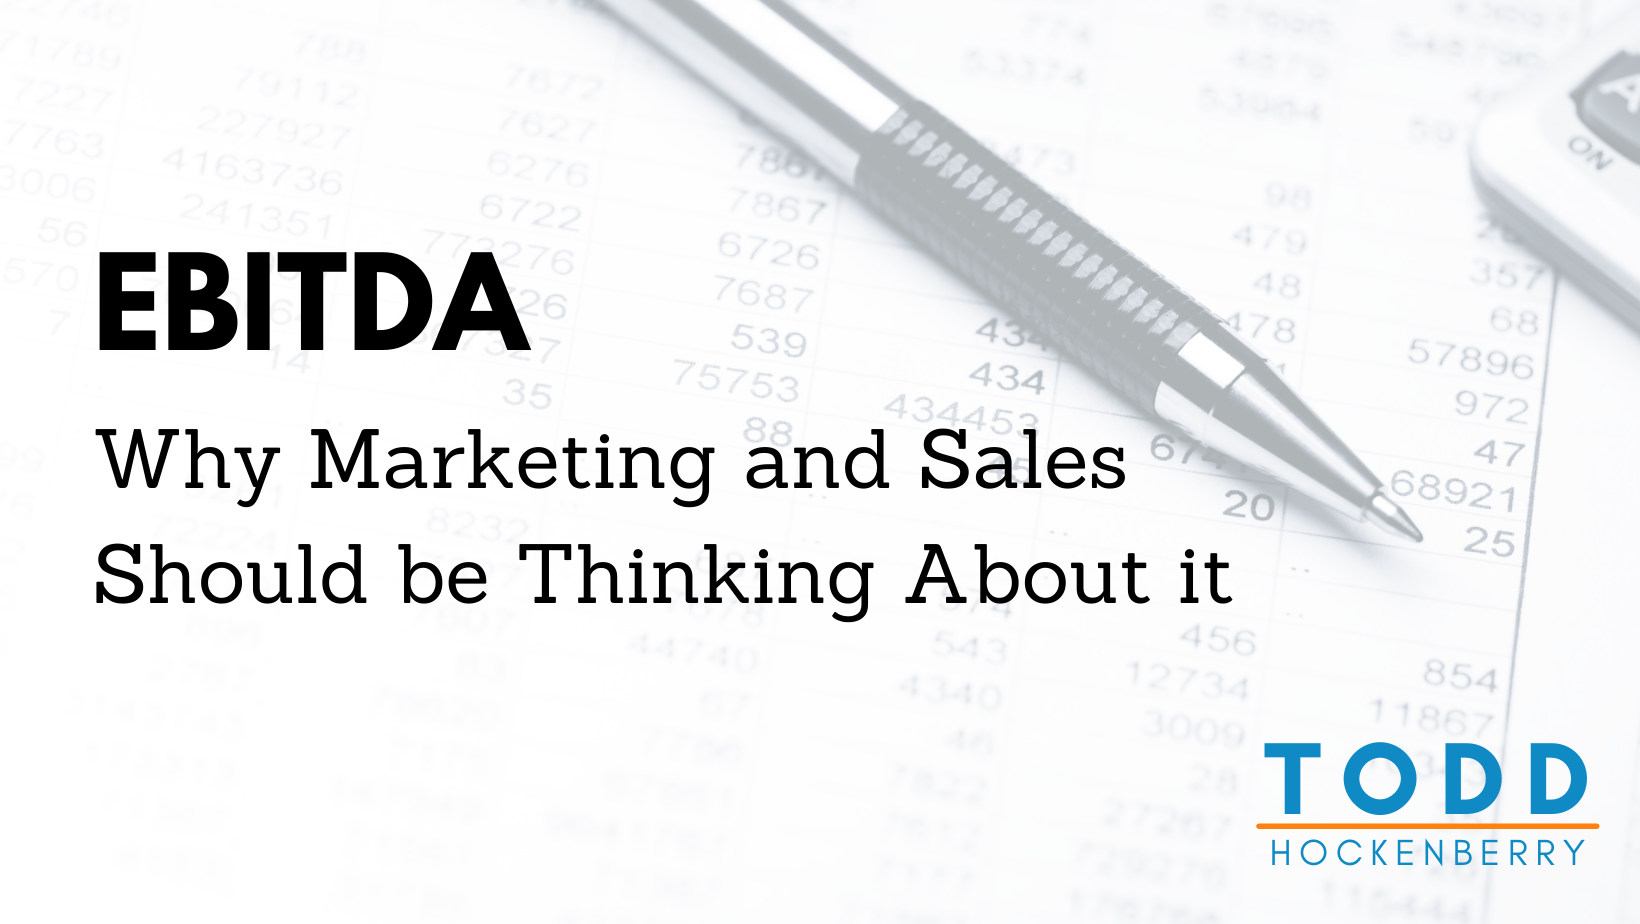 Why Marketing and Sales Should be Thinking about EBITDA